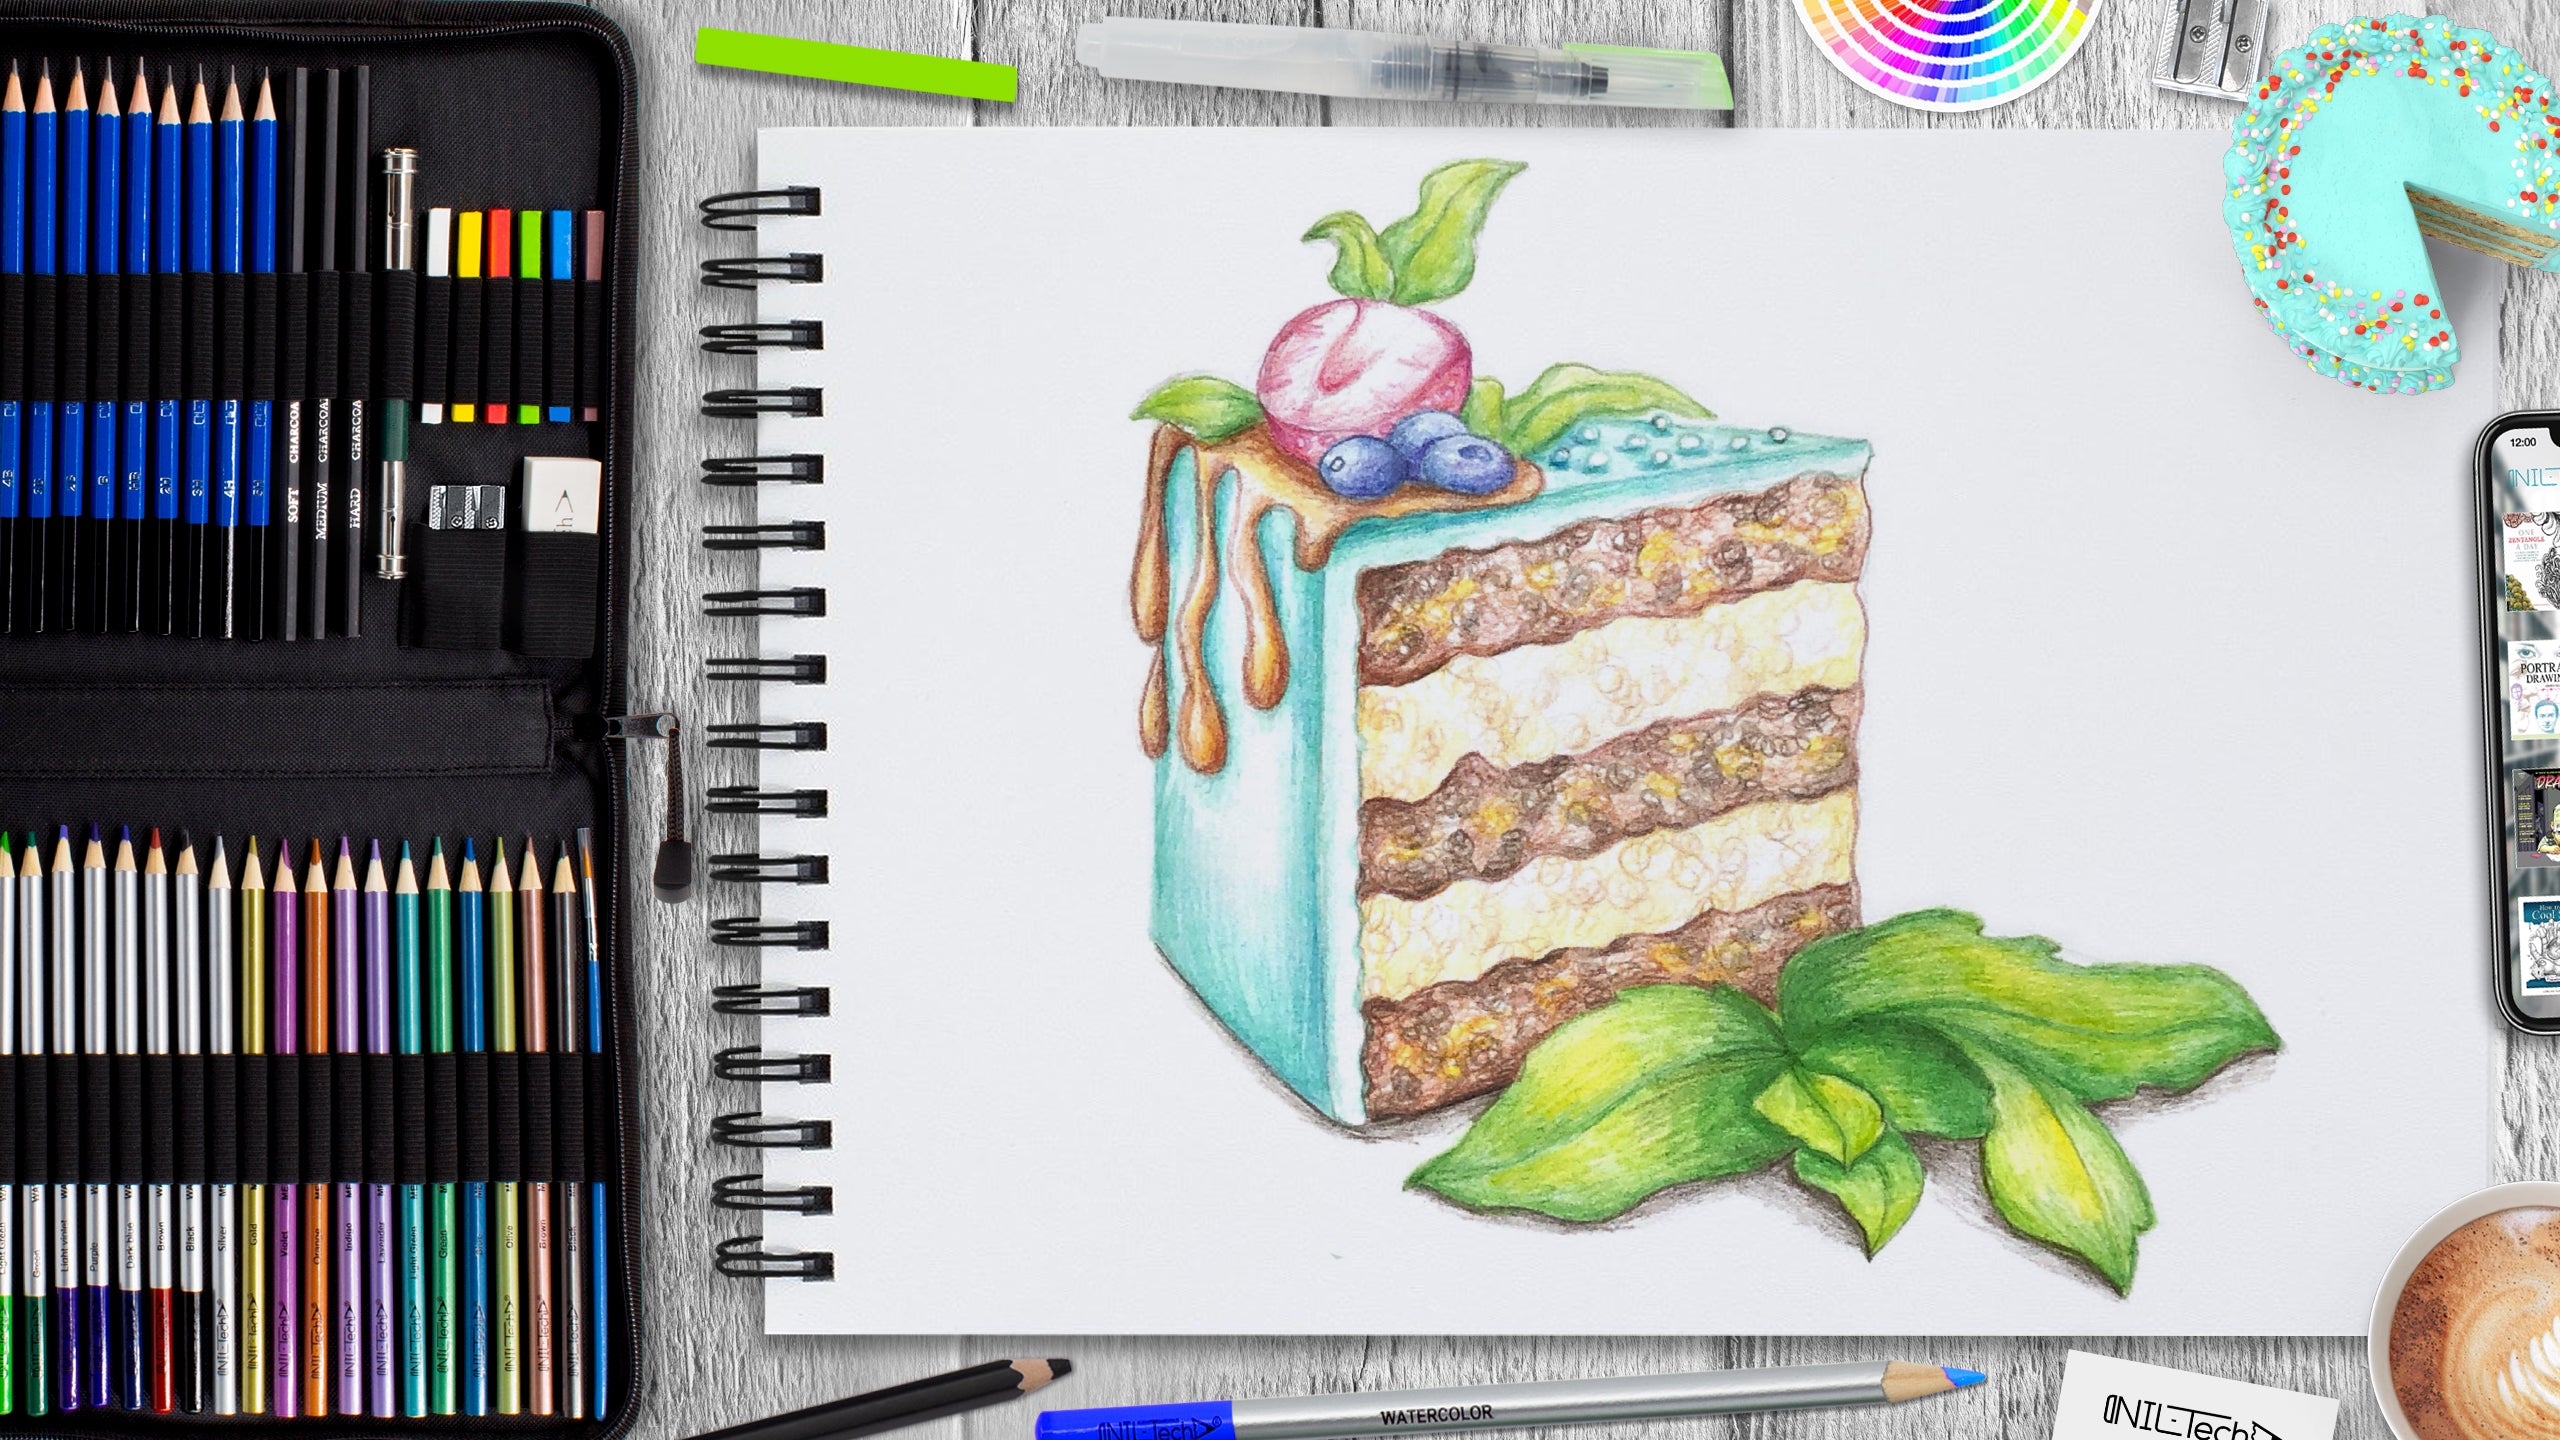 Clara Harmonson  New Post Series Cake Drawing Whats your favorite sweet  or summer dessert Who know you might see that drawn here at some point  drawingforbeginner drawingisfun cakedrawing sketching drawing101  quickdrawing 